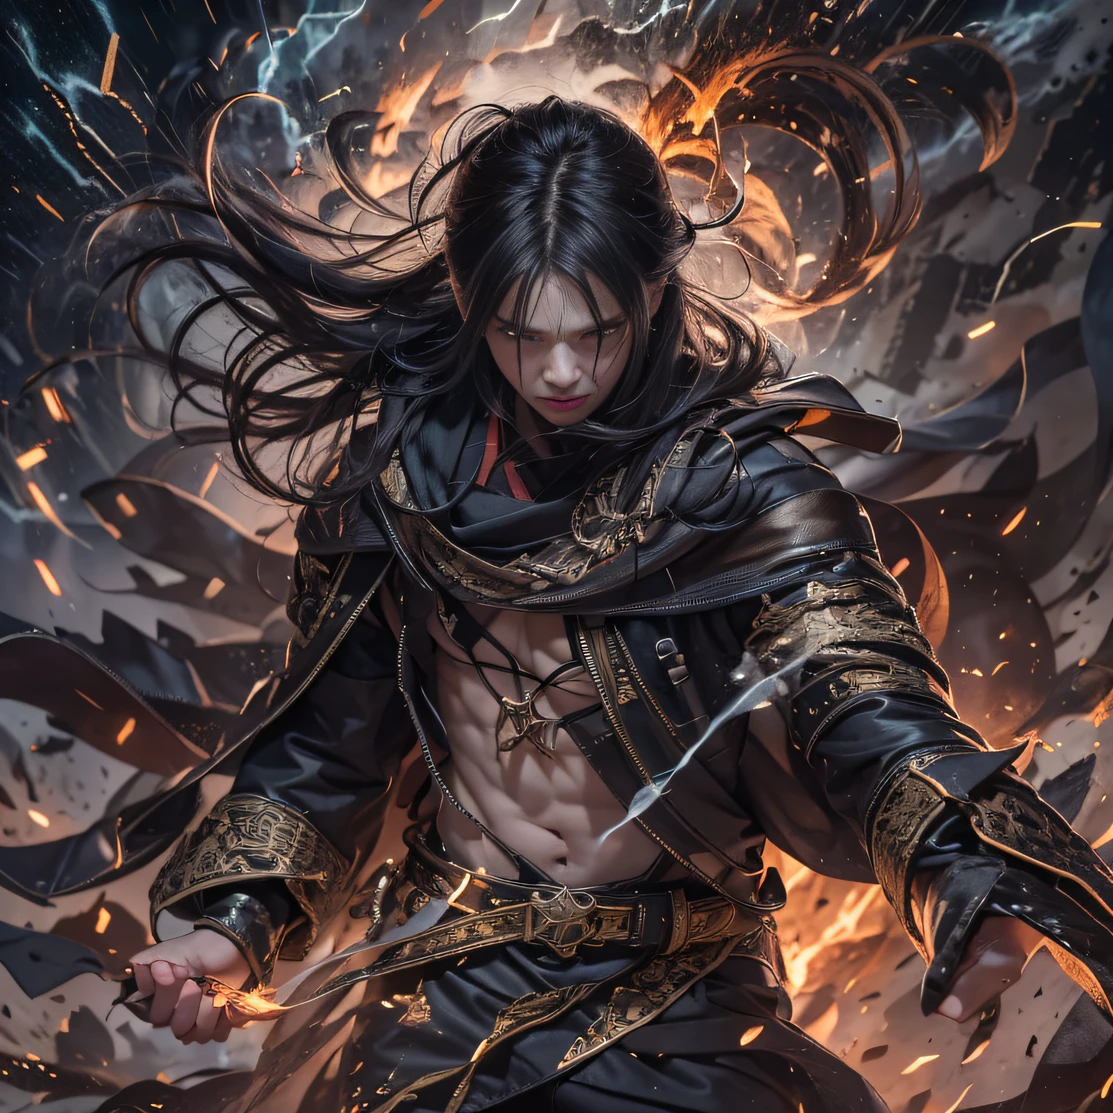 （Doomsday ruins）eyes filled with angry，He clenched his fists，Rush up，Deliver a fatal blow to your opponent，full bodyesbian，Full Body Male Mage 32K（tmasterpiece，hyper HD）Long flowing black hair，Campsite size，zydink， a color， The scene of the explosion（Doomsday ruins）， （Linen batik scarf）， Angry fighting stance， looking at the ground， Batik linen bandana， Chinese python pattern long-sleeved garment， （Abstract propylene splash：1.2）， Dark clouds lightning background，Flour flies（realisticlying：1.4），Black color hair，Flour fluttering，Background fog， A high resolution， the detail， RAW photogr， Sharp Re， Nikon D850 Film Stock Photo by Jefferies Lee 4 Kodak Portra 400 Camera F1.6 shots, Rich colors, ultra-realistic vivid textures, Dramatic lighting, Unreal Engine Art Station Trend, cinestir 800，Flowing black hair,（（（Male mage））），The male mage was furious，